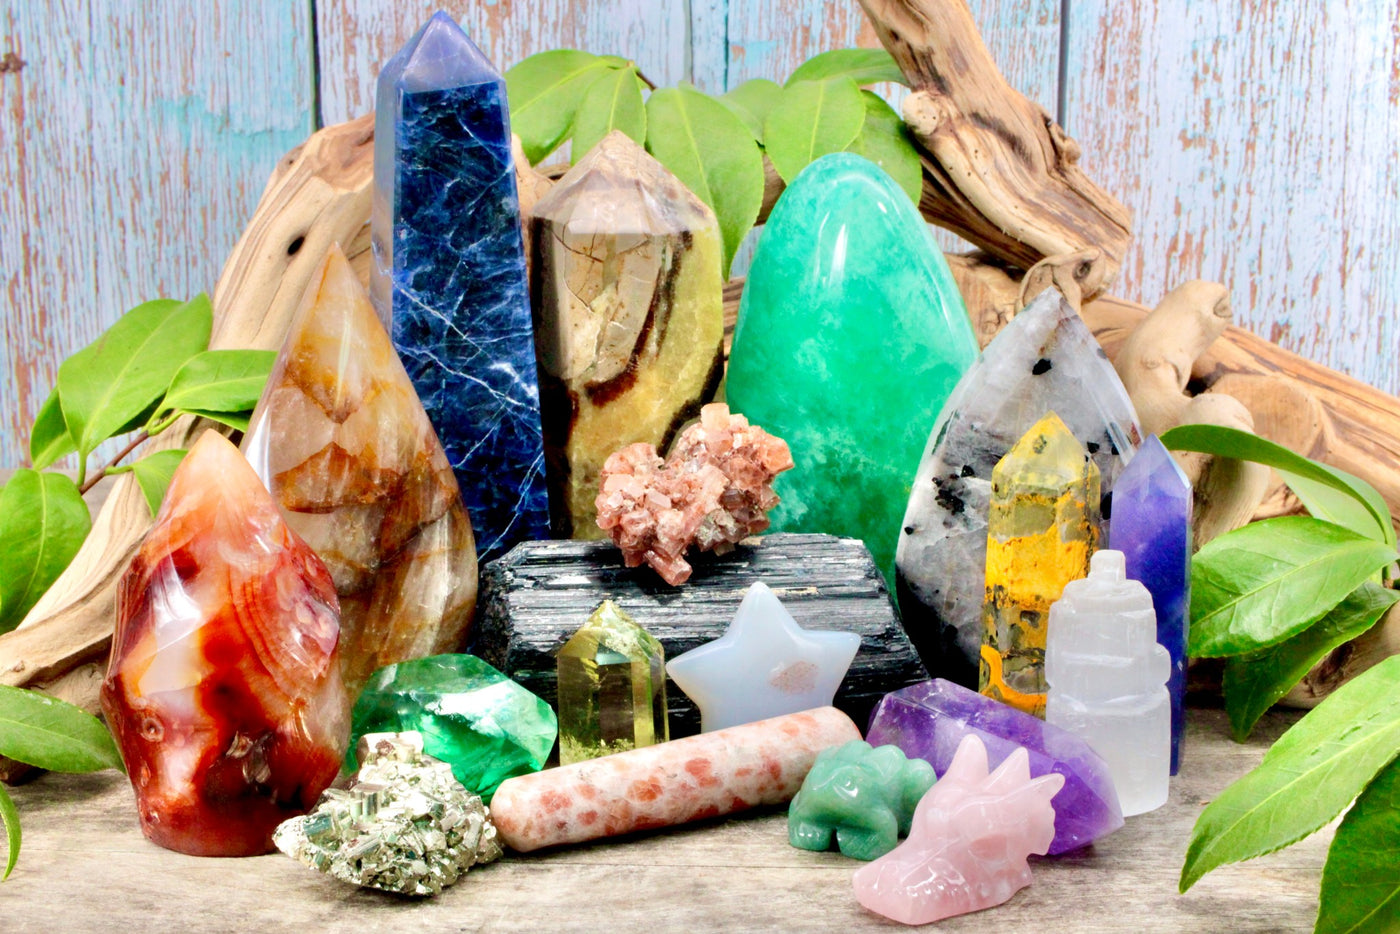 Assortment of rocks and gemstones in many colors